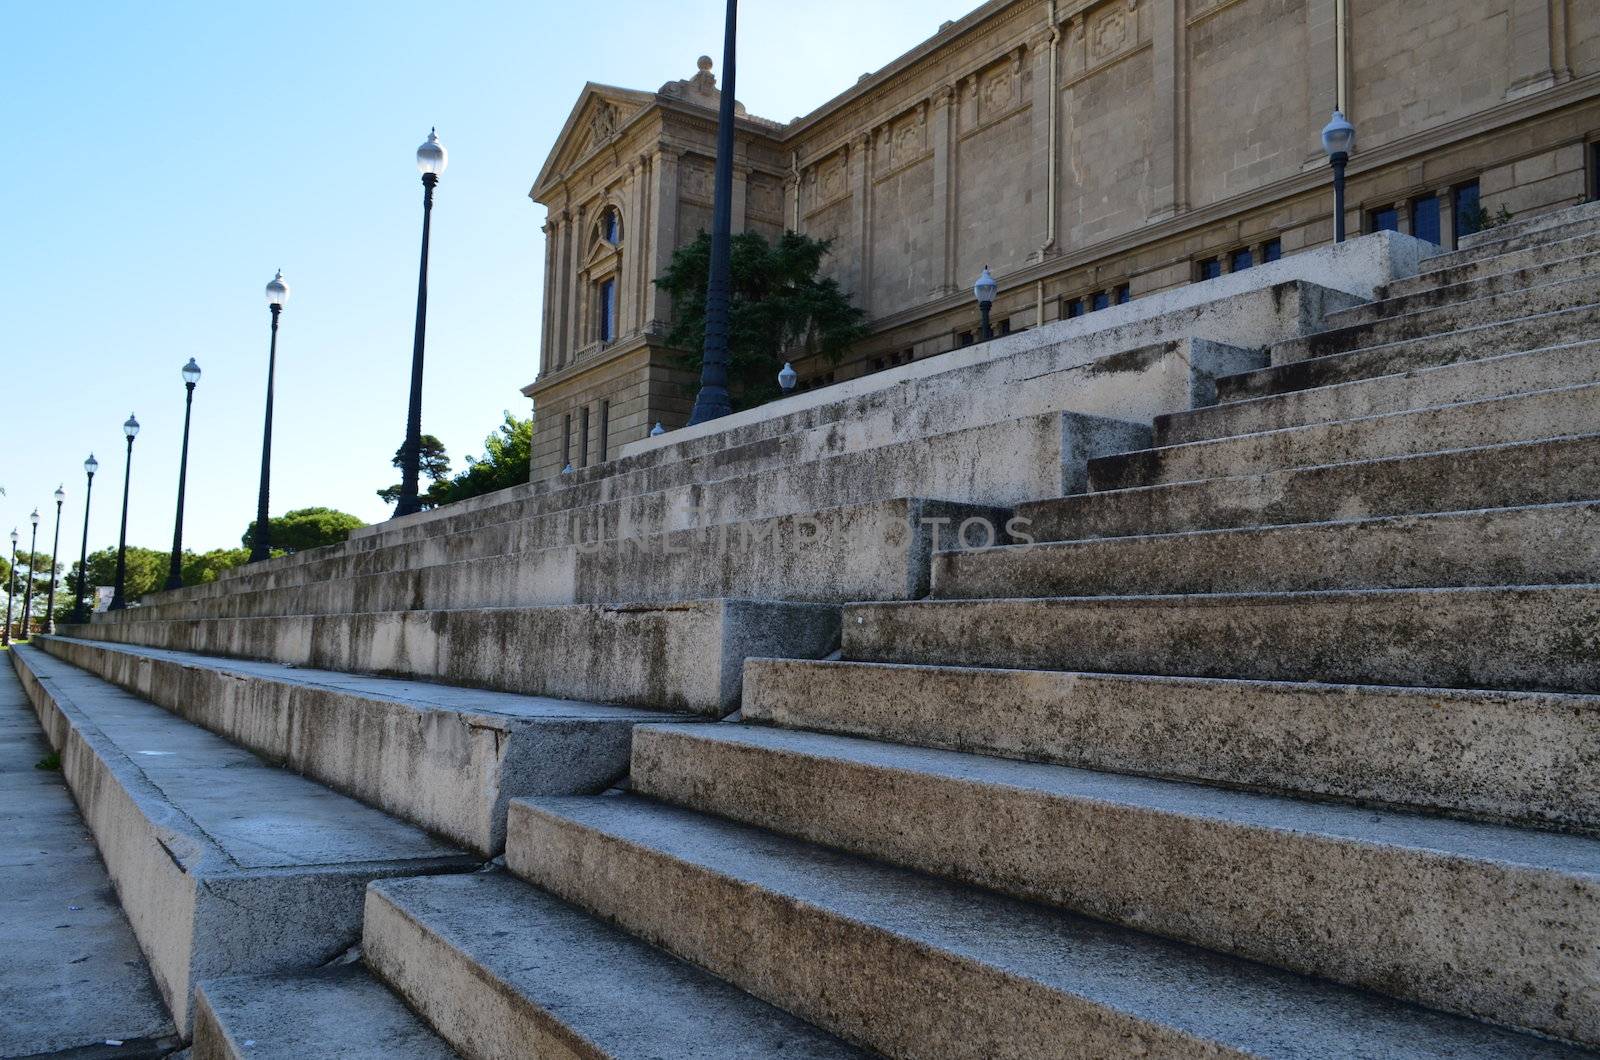 Large stone steps outside the National Arts Museum, Barcelona,Spain.